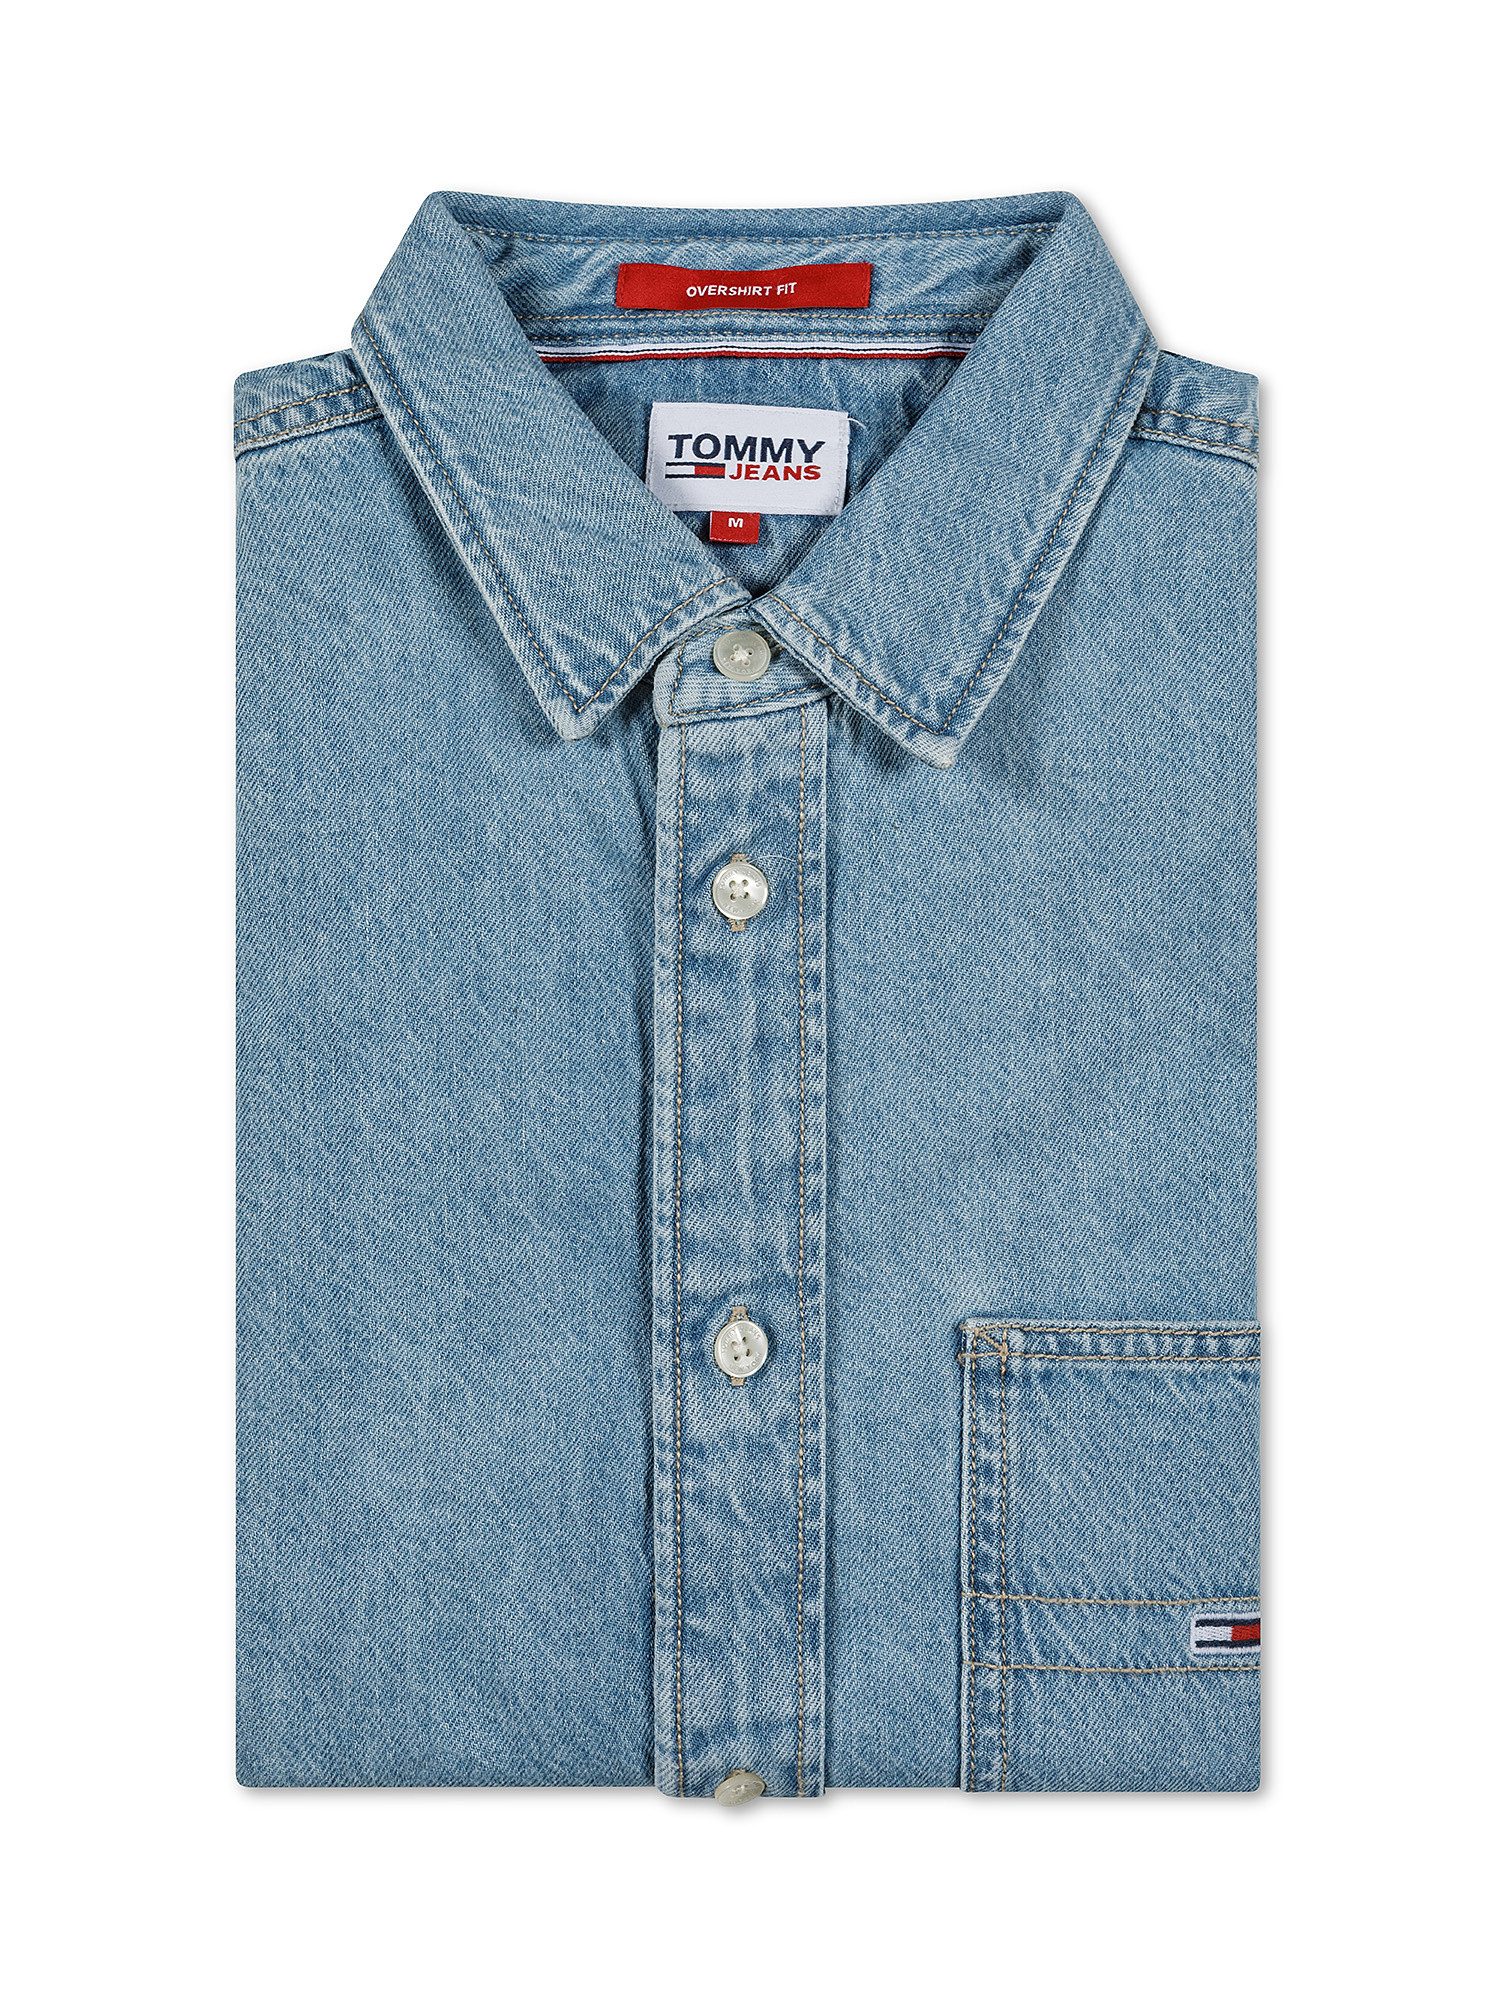 Tommy Jeans - Cotton shirt with logo, Denim, large image number 2